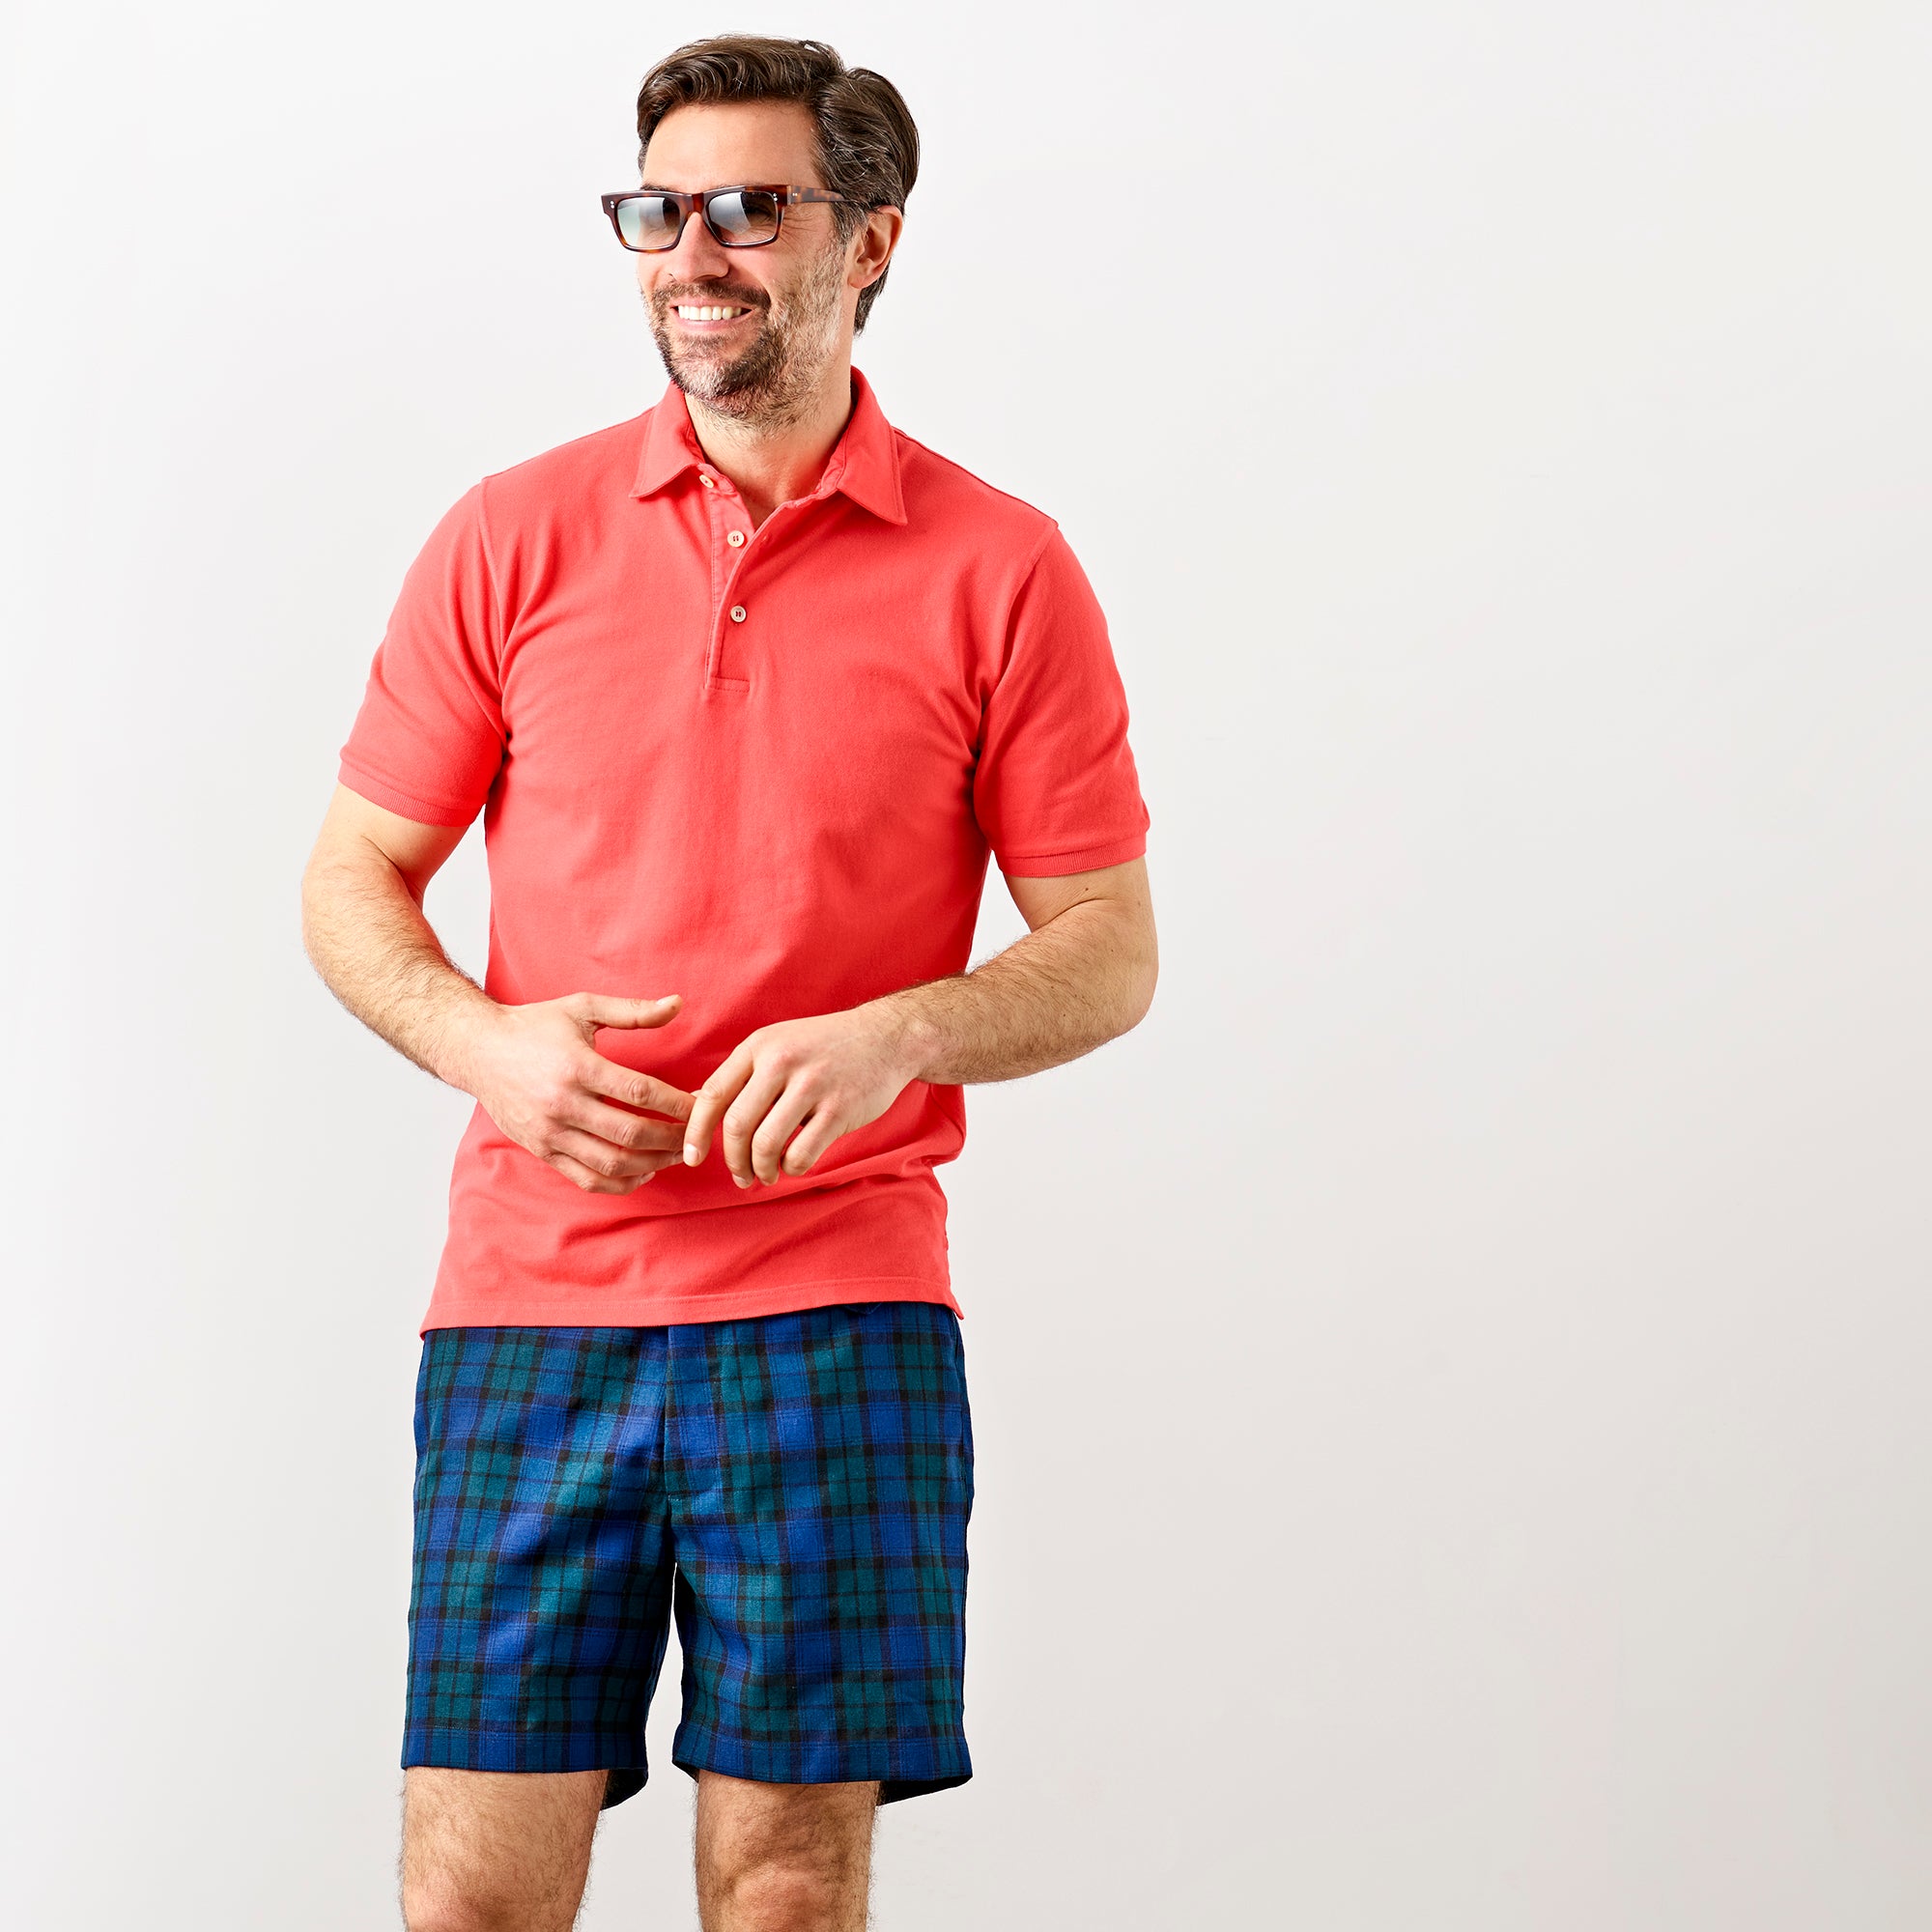 Lifestyle image of a middle aged man wearing a Fedeli Classic Short Sleeve Knitted Pique Polo Shirt Coral